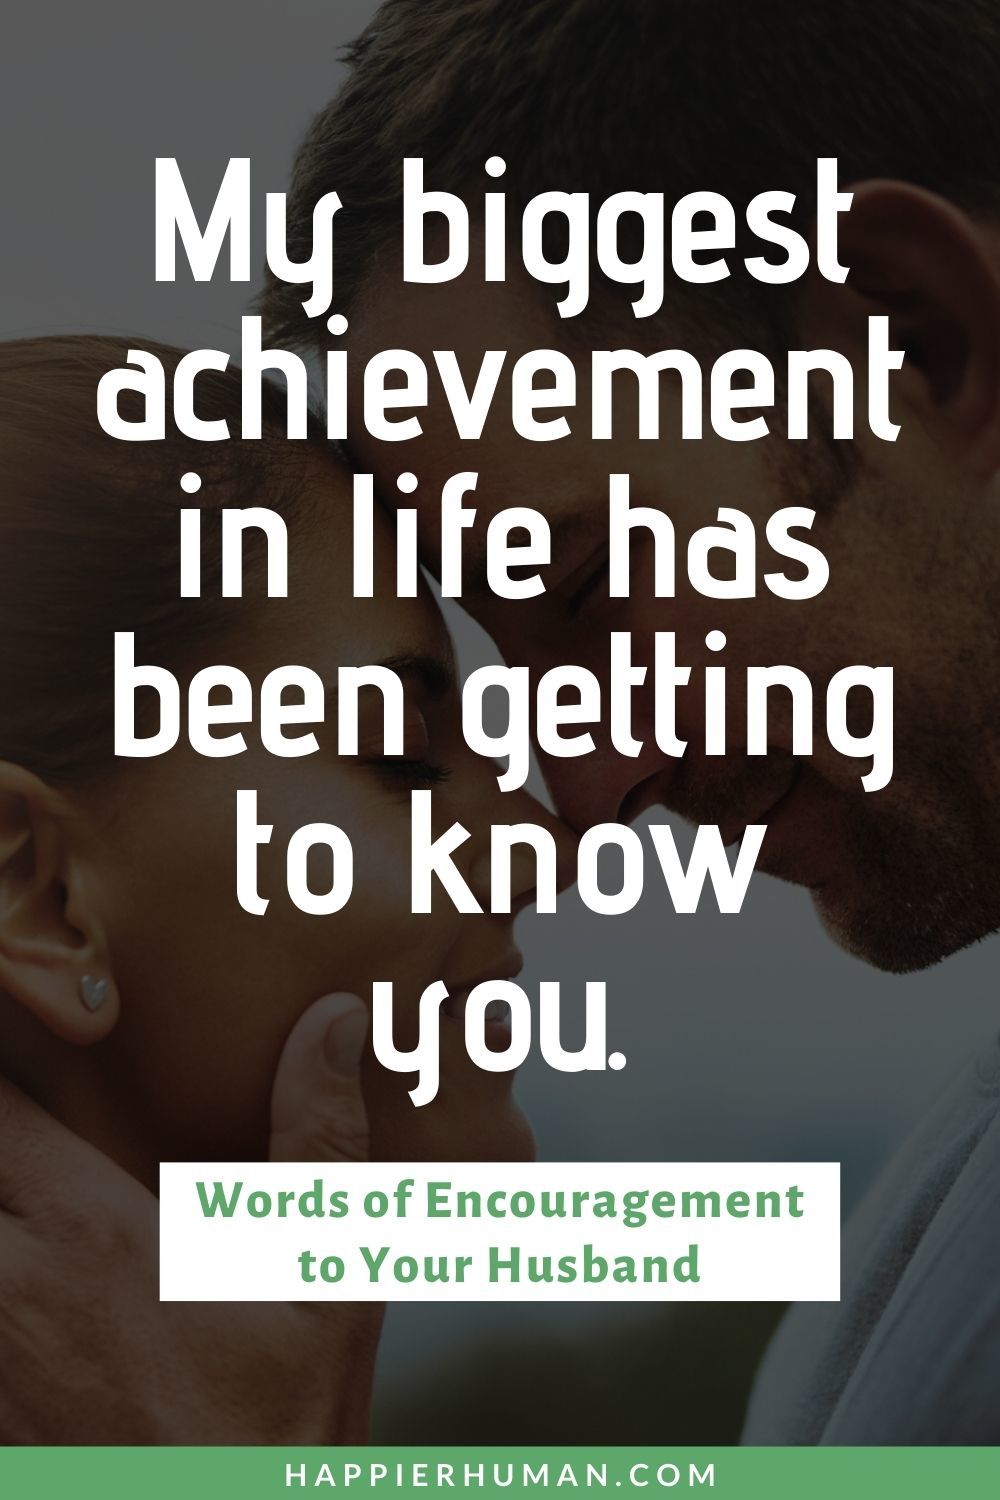 Words of Encouragement for Husbands - My biggest achievement in life has been getting to know you. | words of encouragement for husband during hard times | words of encouragement for a man you love | encouraging text messages for husband